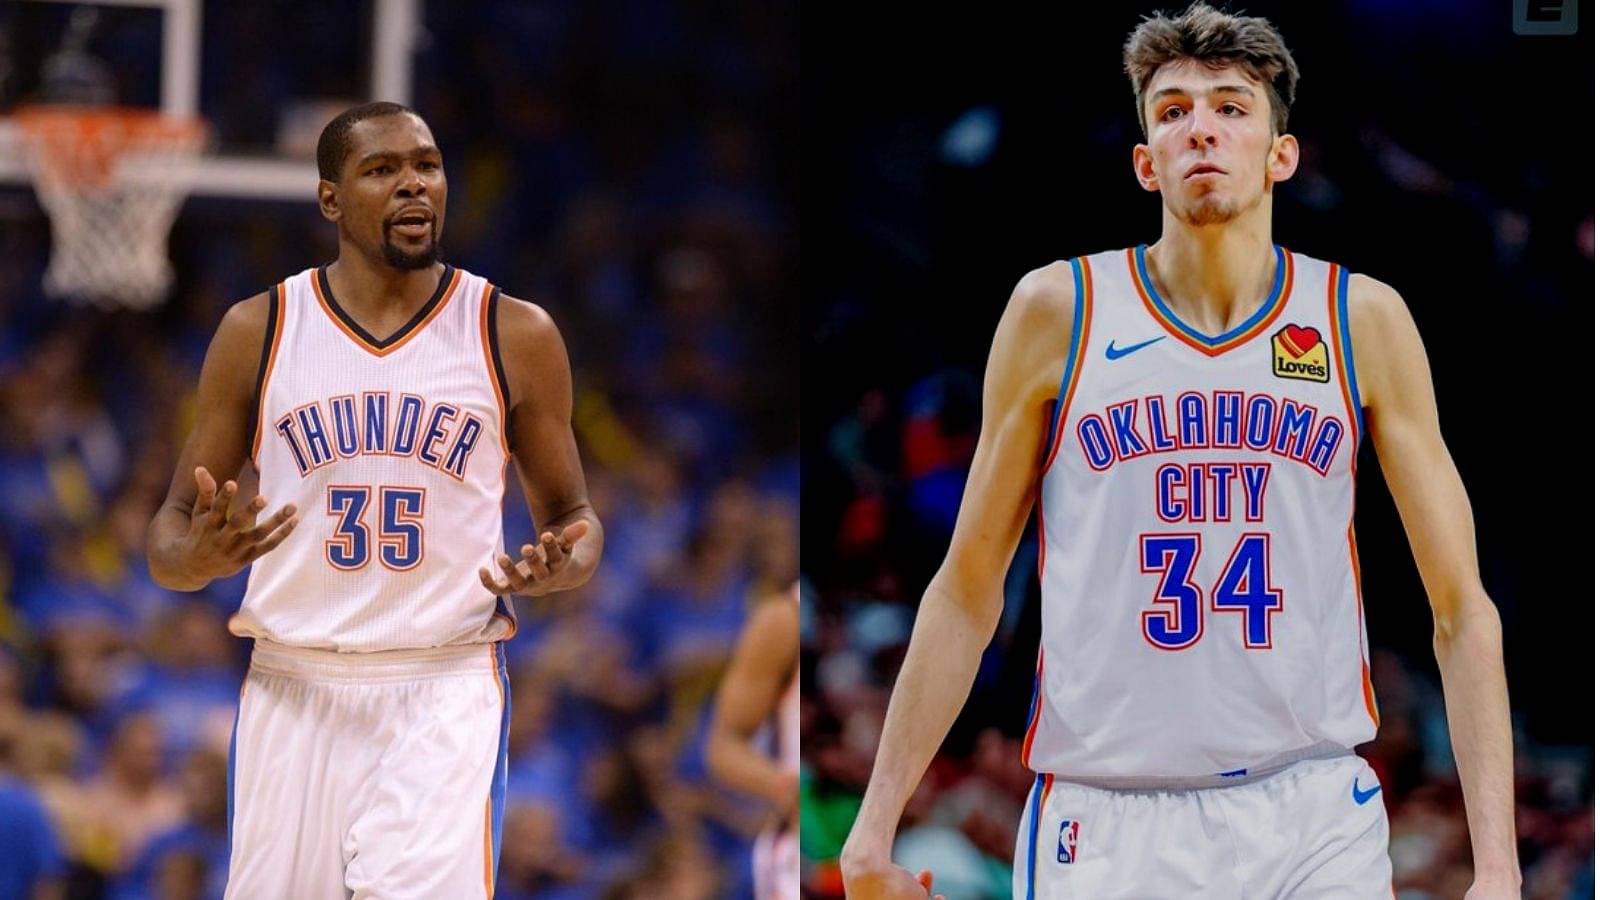 “Chet Holmgren in the summer league Kevin Durant”: OKC’s 7’1 rookie with 13 pts and 3 blocks in the 1st quarter of his debut sends NBA Twitter on a frenzy